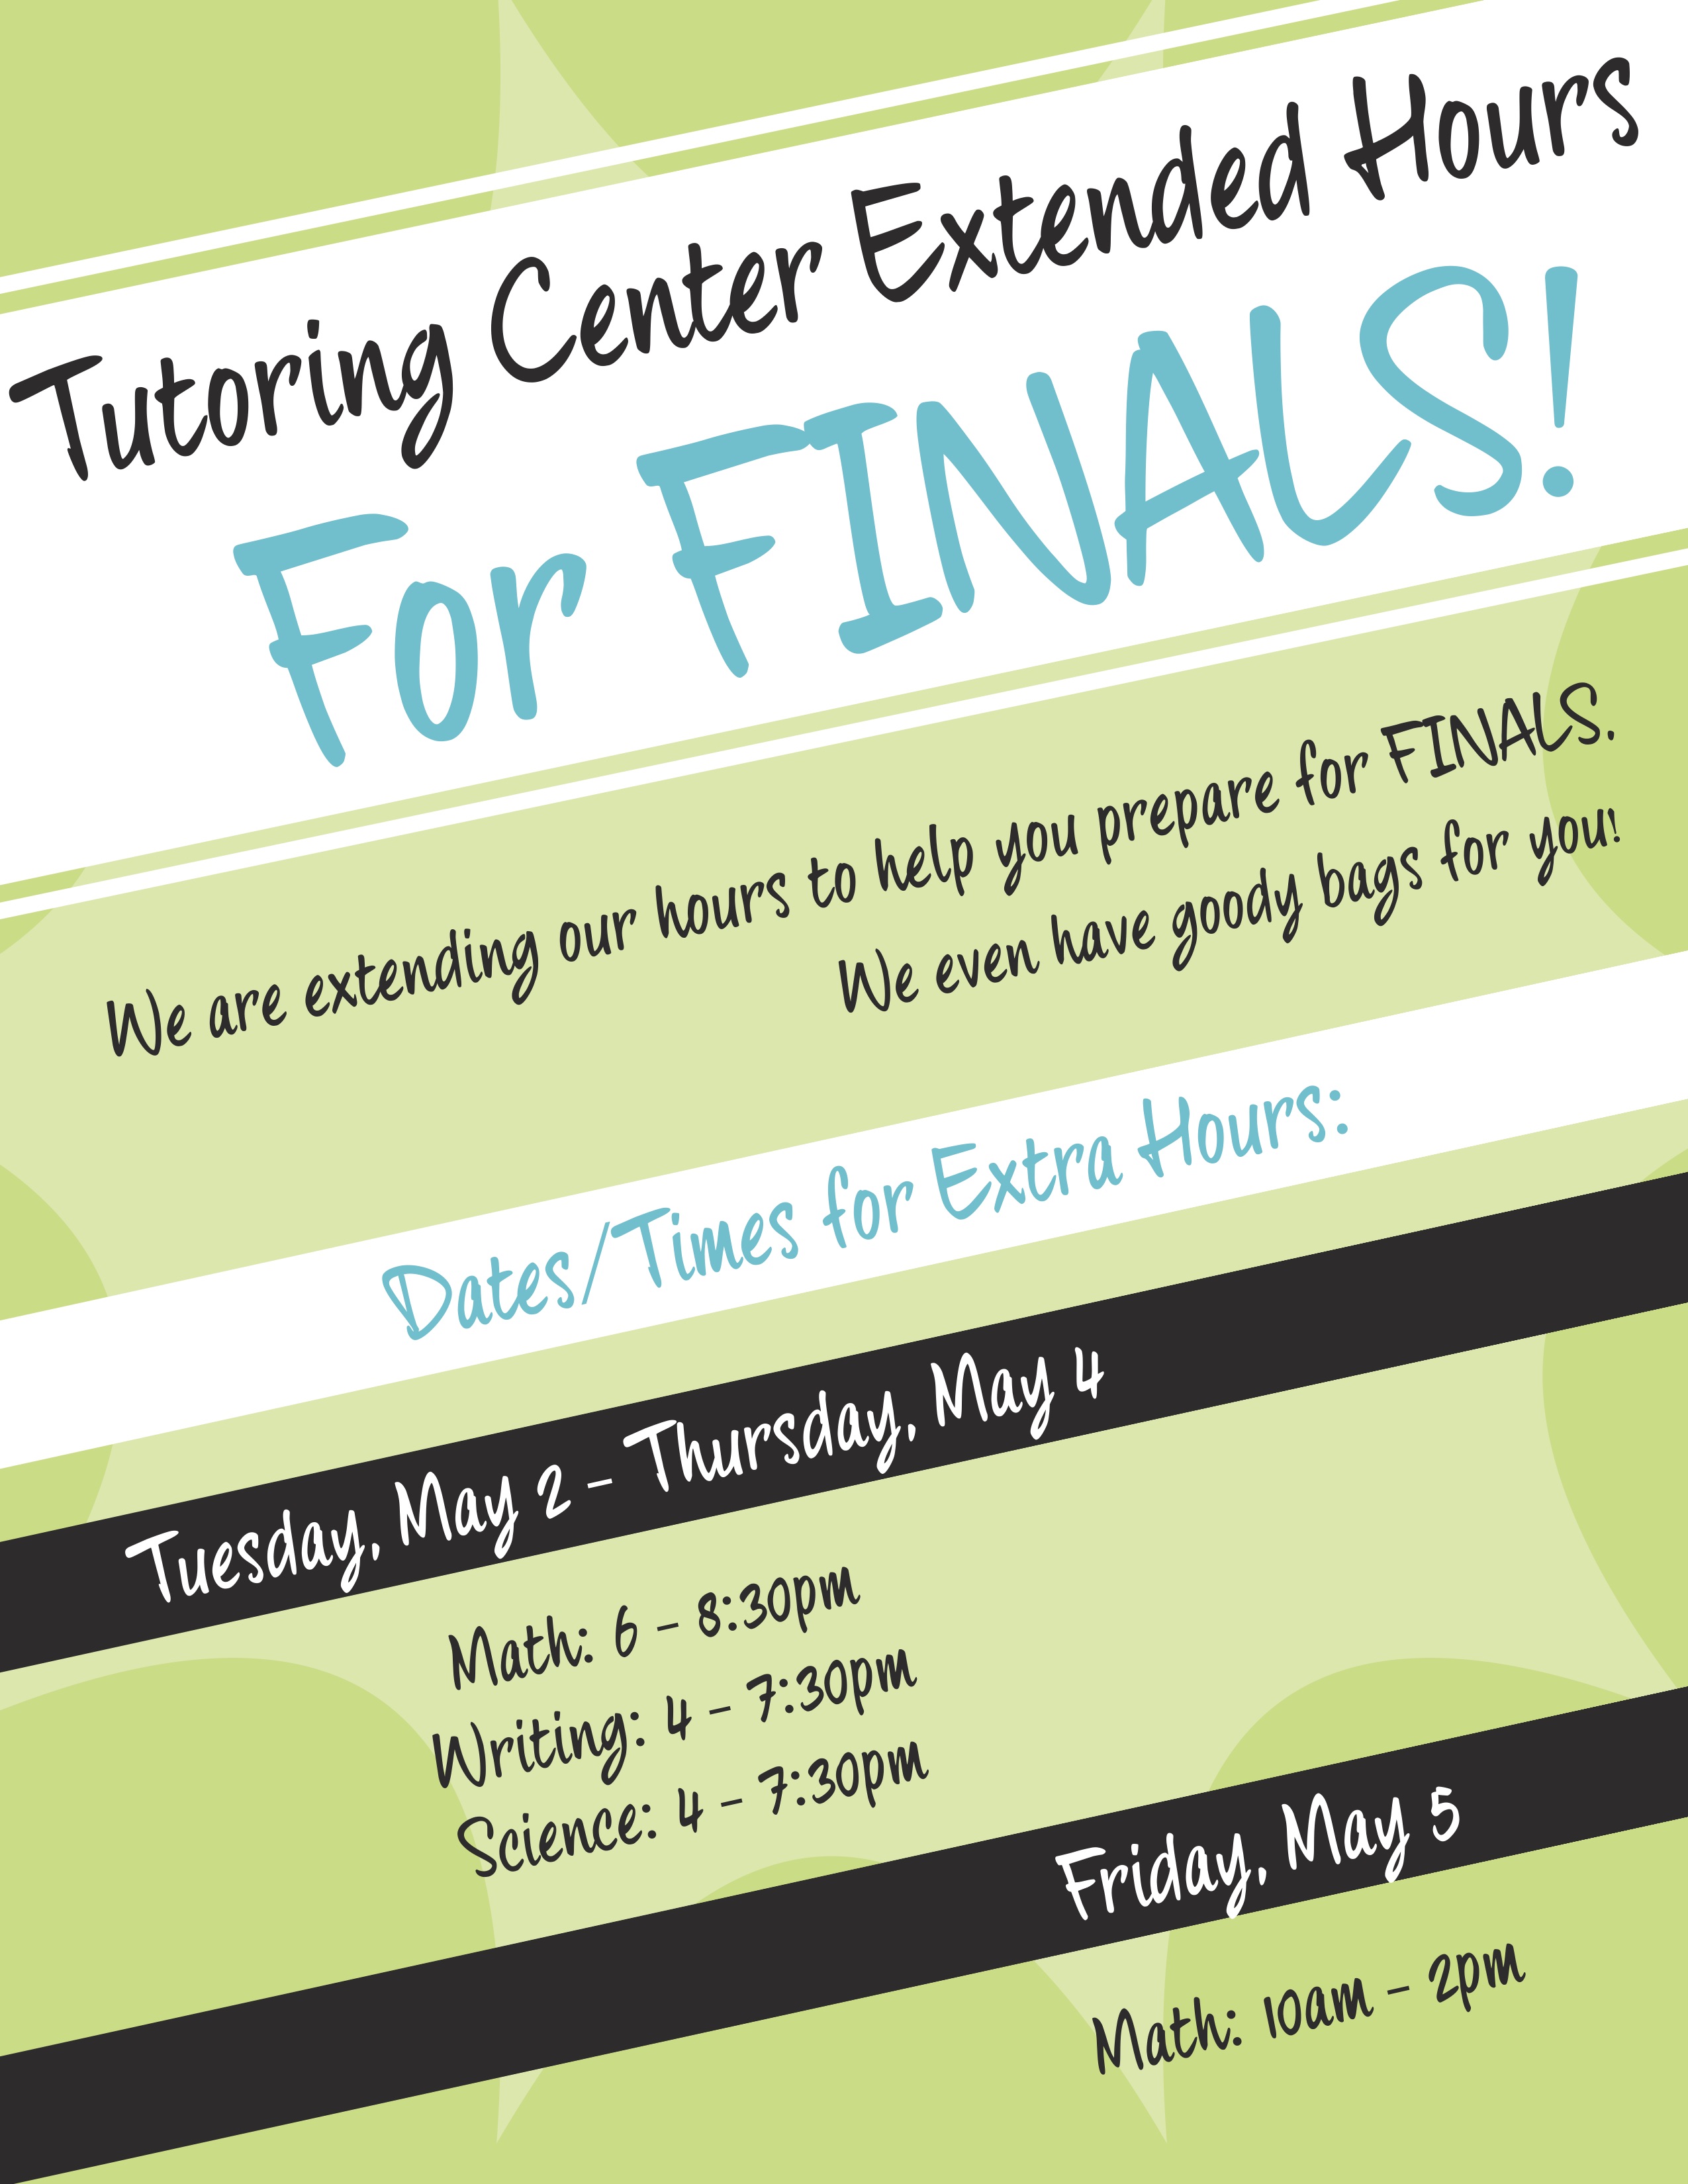 Tutoring Center Extended Hours for Finals!